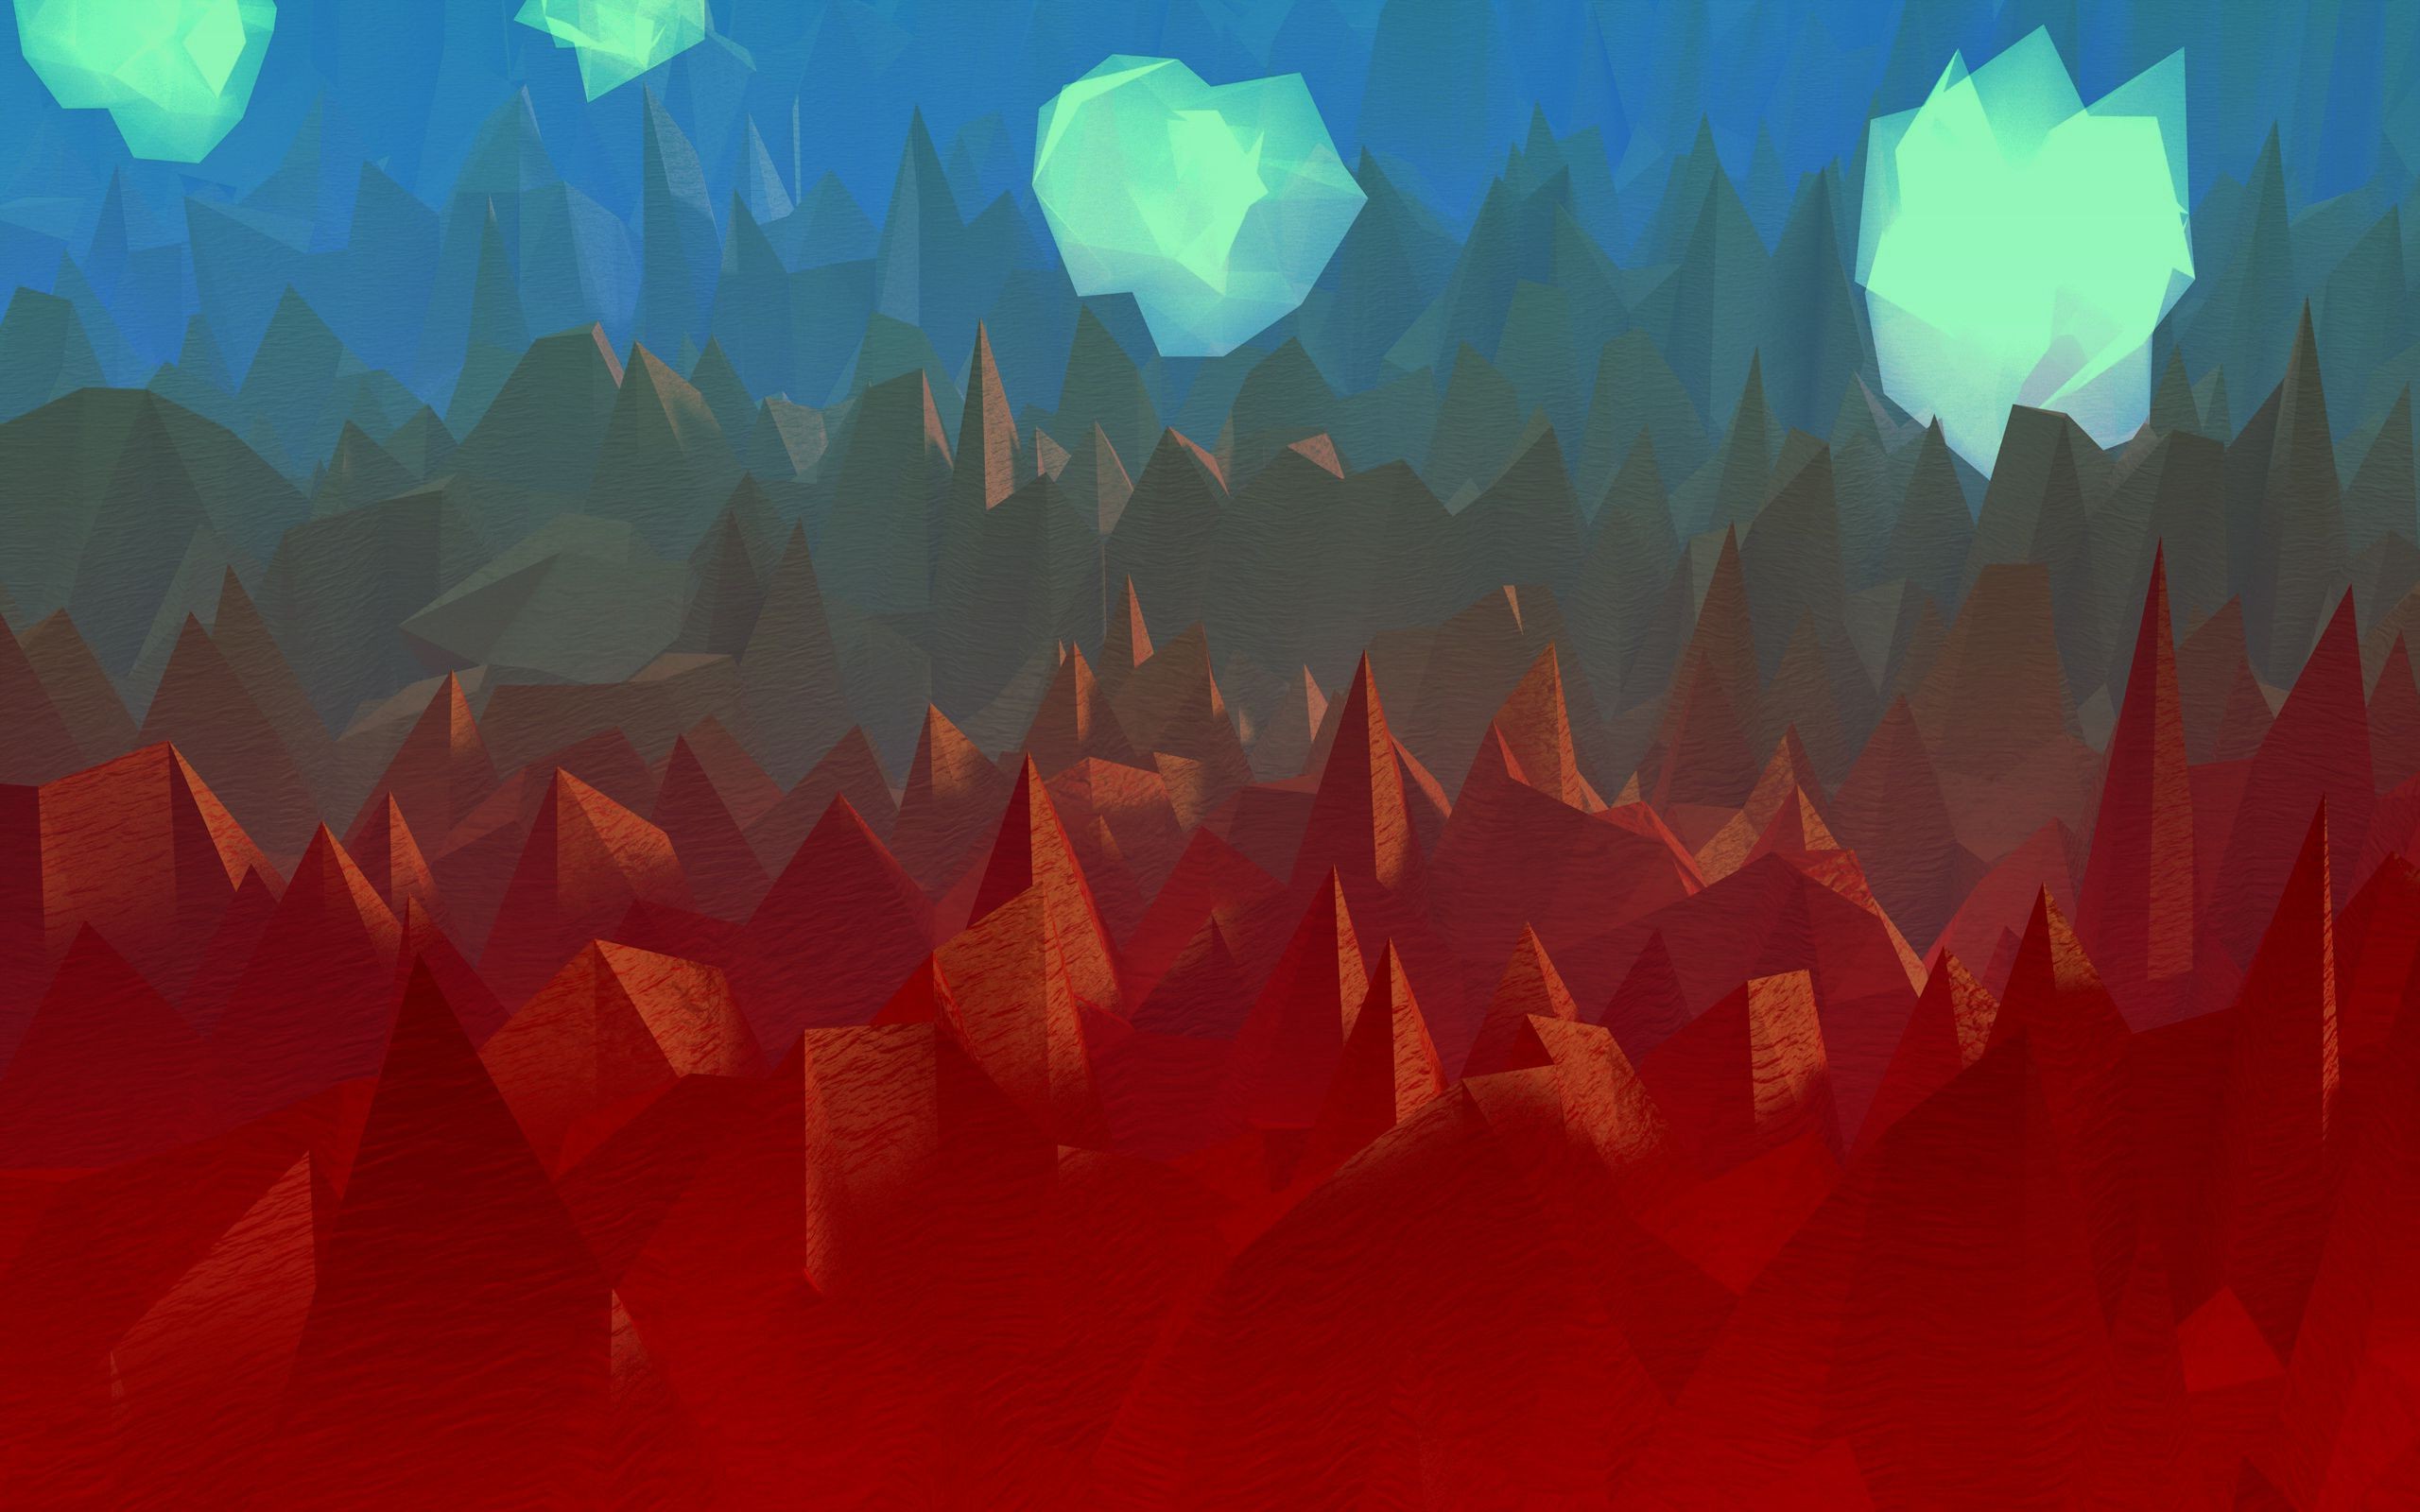 artwork, Mountain, Clouds, Abstract, Digital Art, Low Poly, Landscape Wallpaper